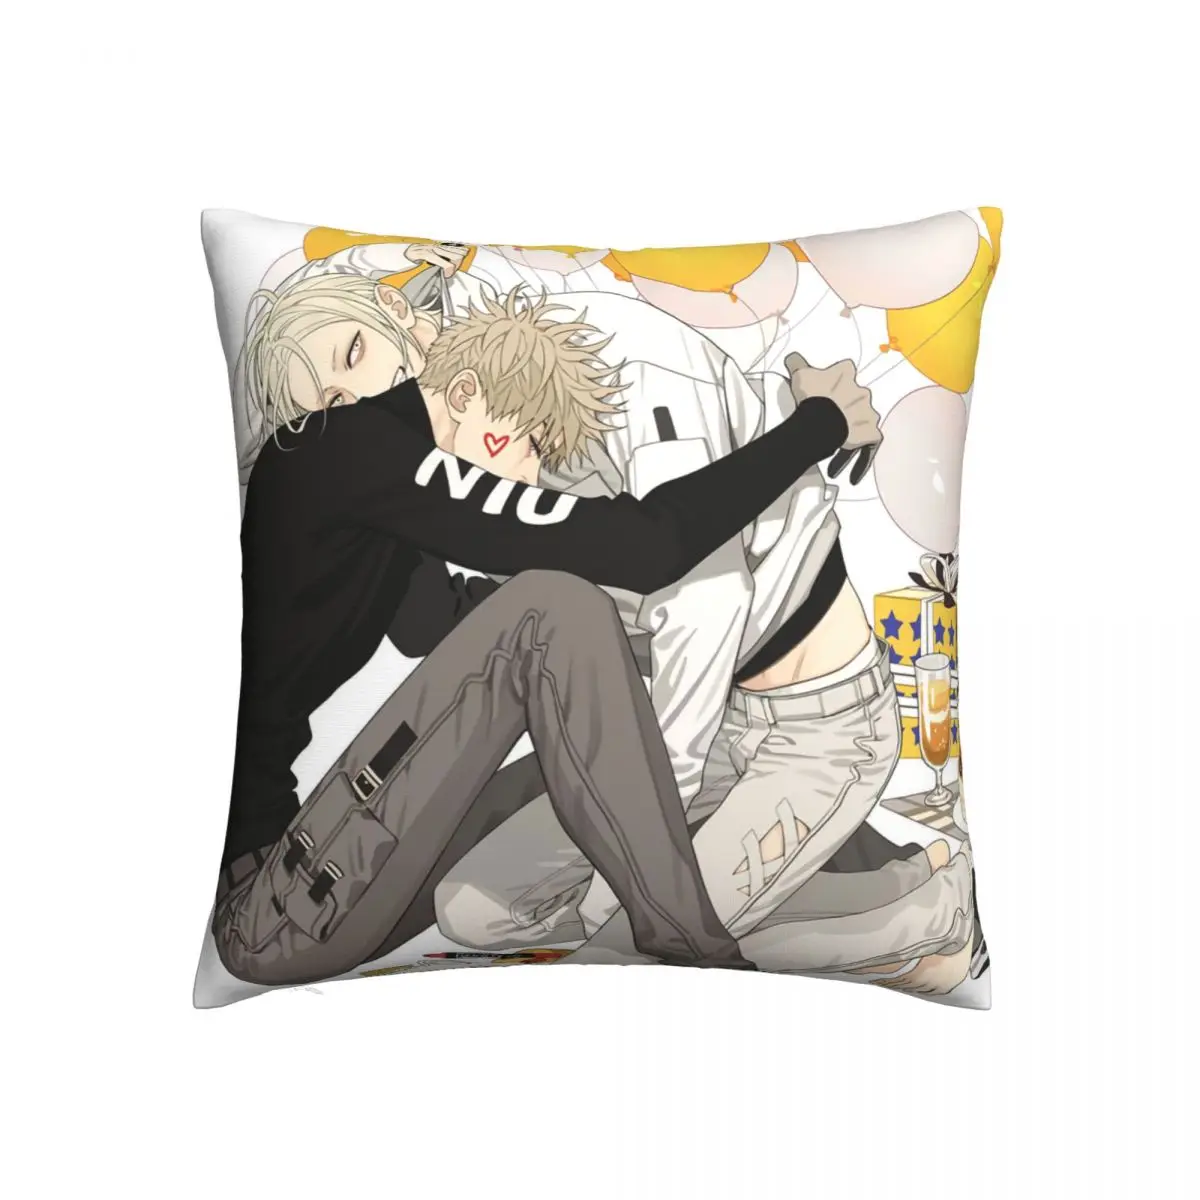 

Old Xian Pillowcase Polyester Cushion Cover Decorations 19 Days Anime Mangas Throw Pillow Case Cover Home Dropshipping 40X40cm